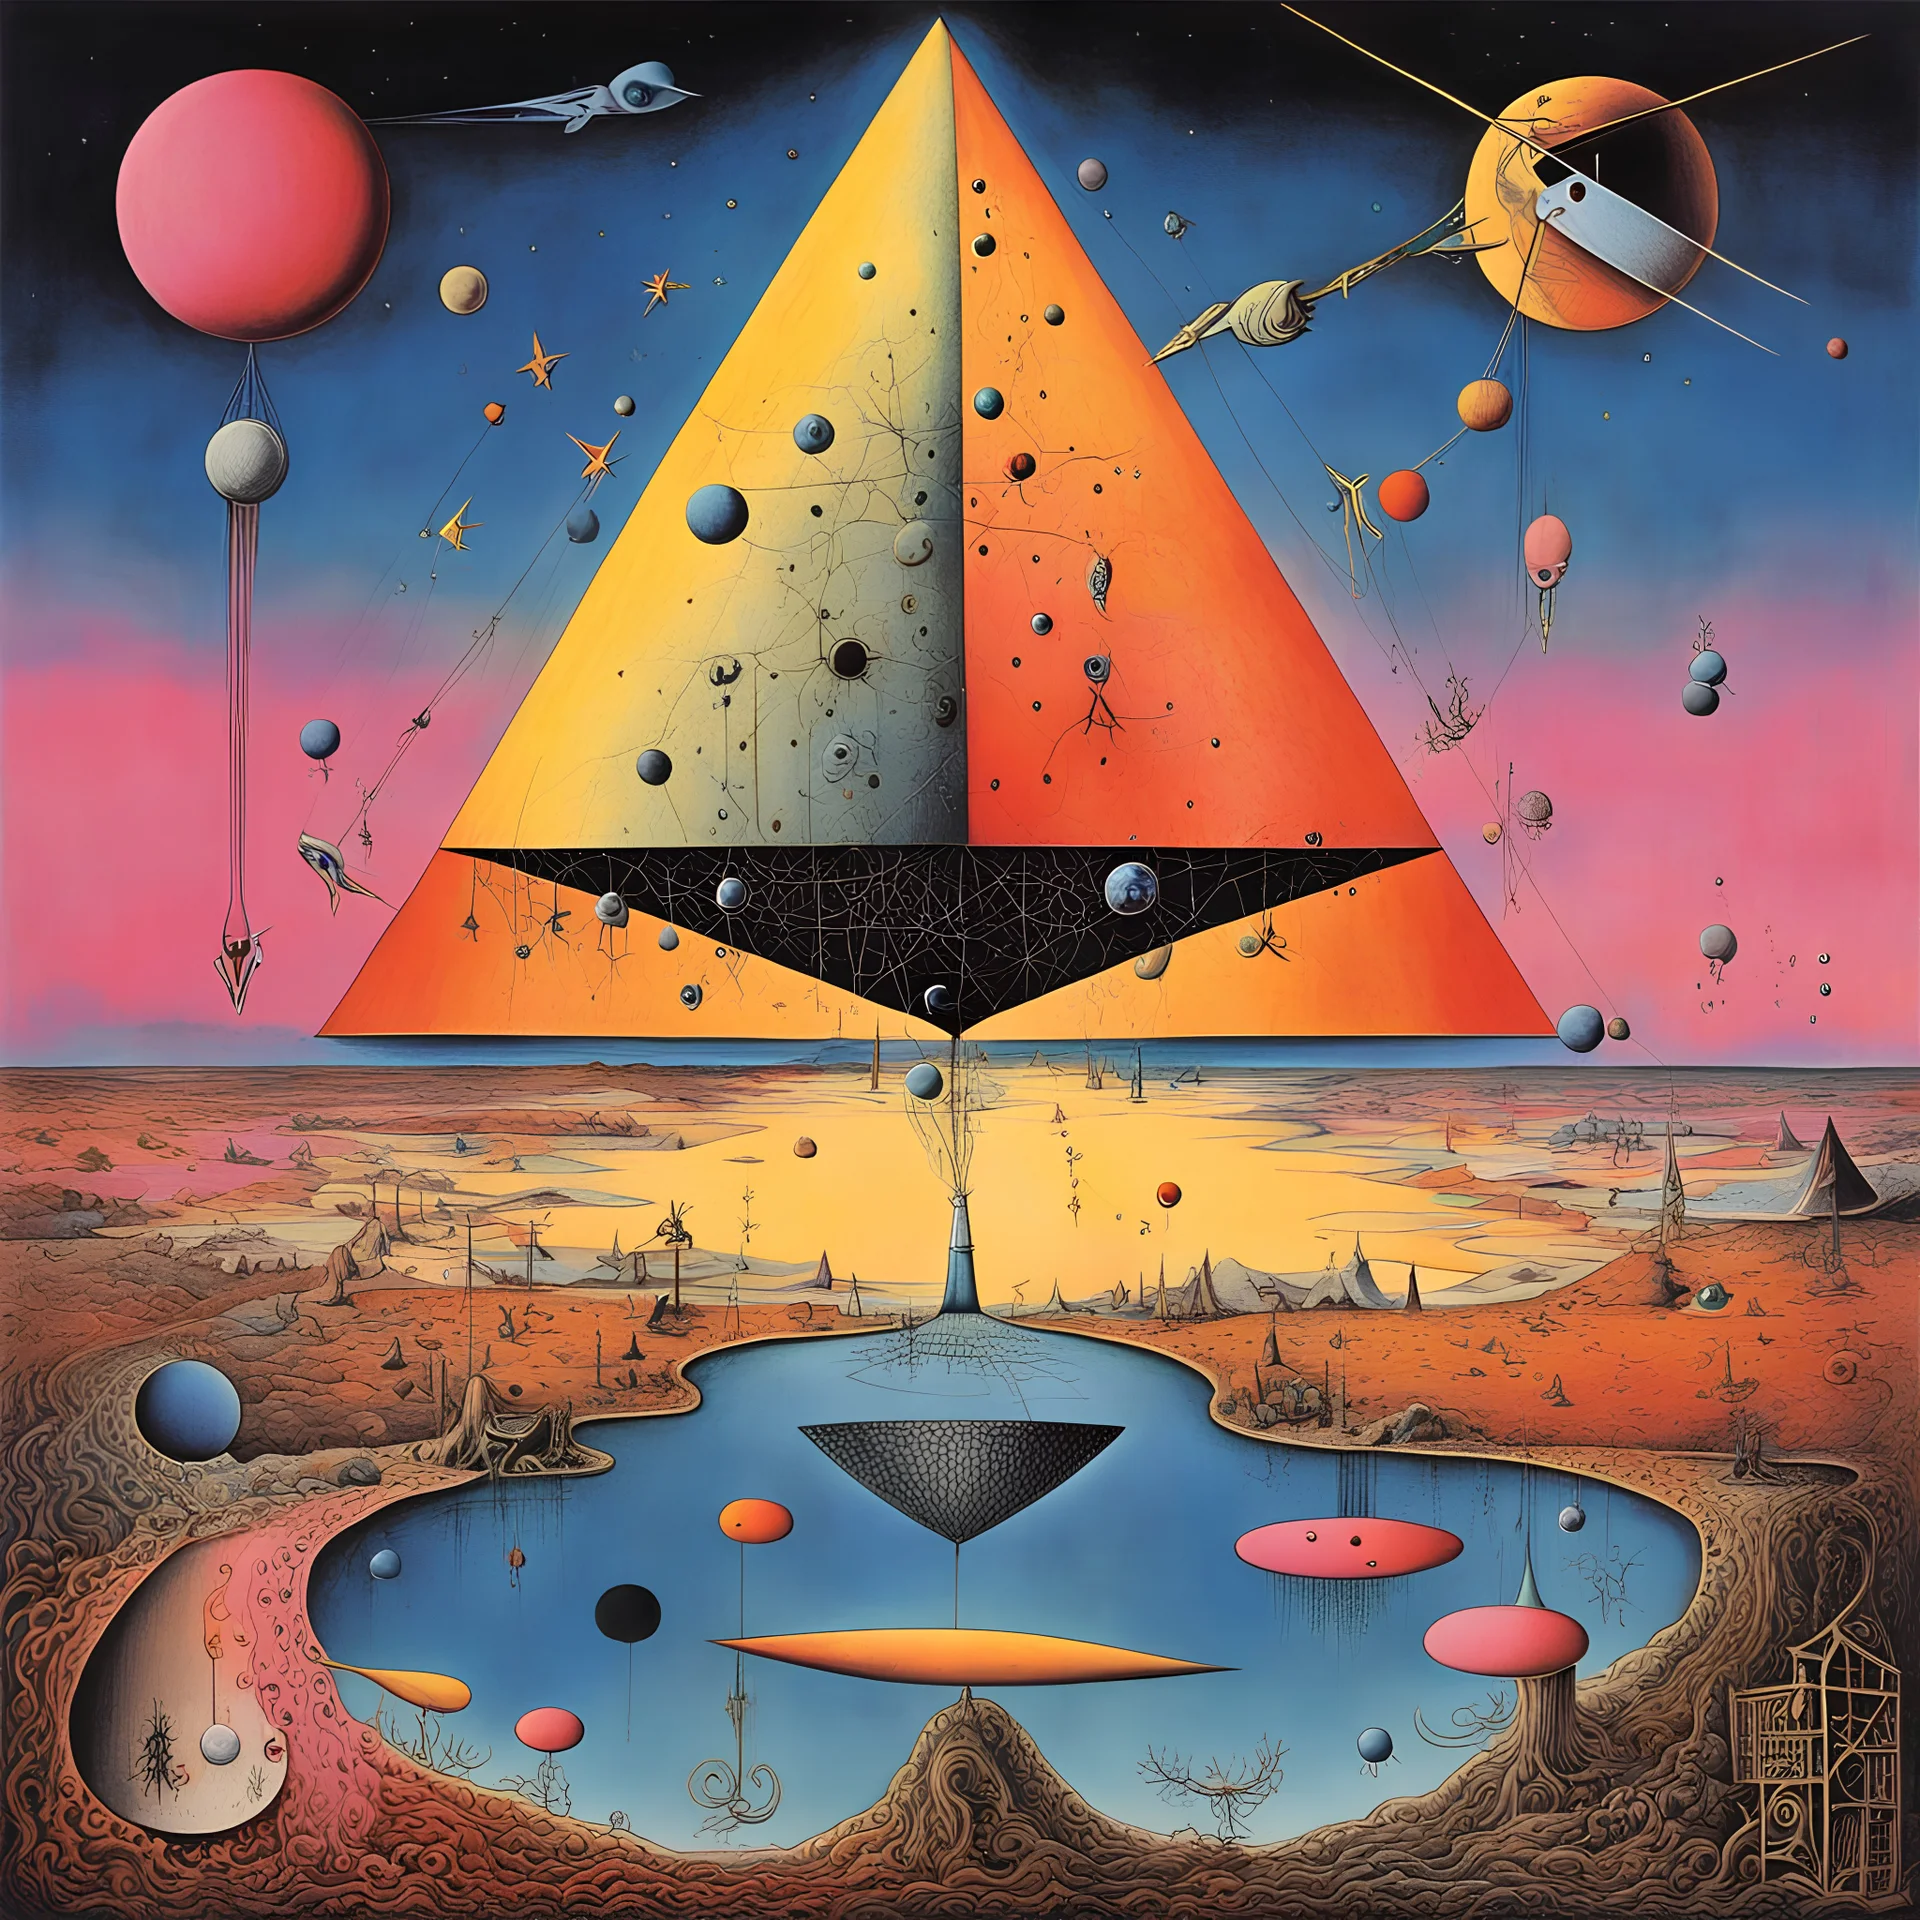 by Joan Miro and Tamasz Setowski, Pink_Floyd album cover art, what did you dream - we told you what to dream, album cover art, sharp colors, eerie, smooth, surreal, THE MACHINE